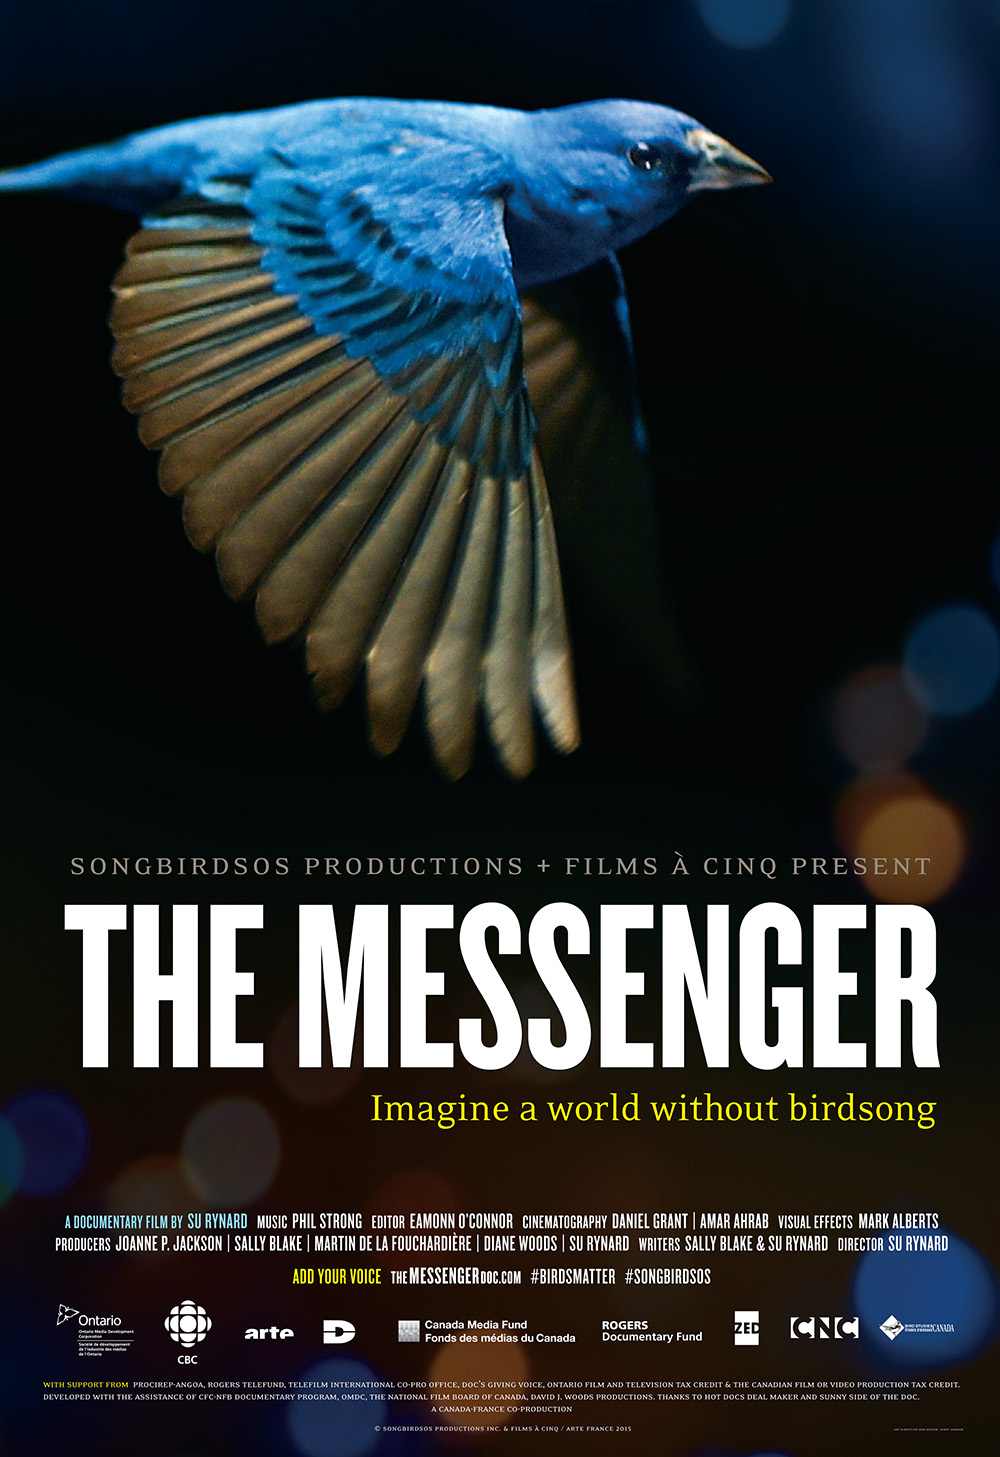 EARTH DAY BIOLOGY EVENT: SHOWING OF &#8216;THE MESSENGER&#8217;